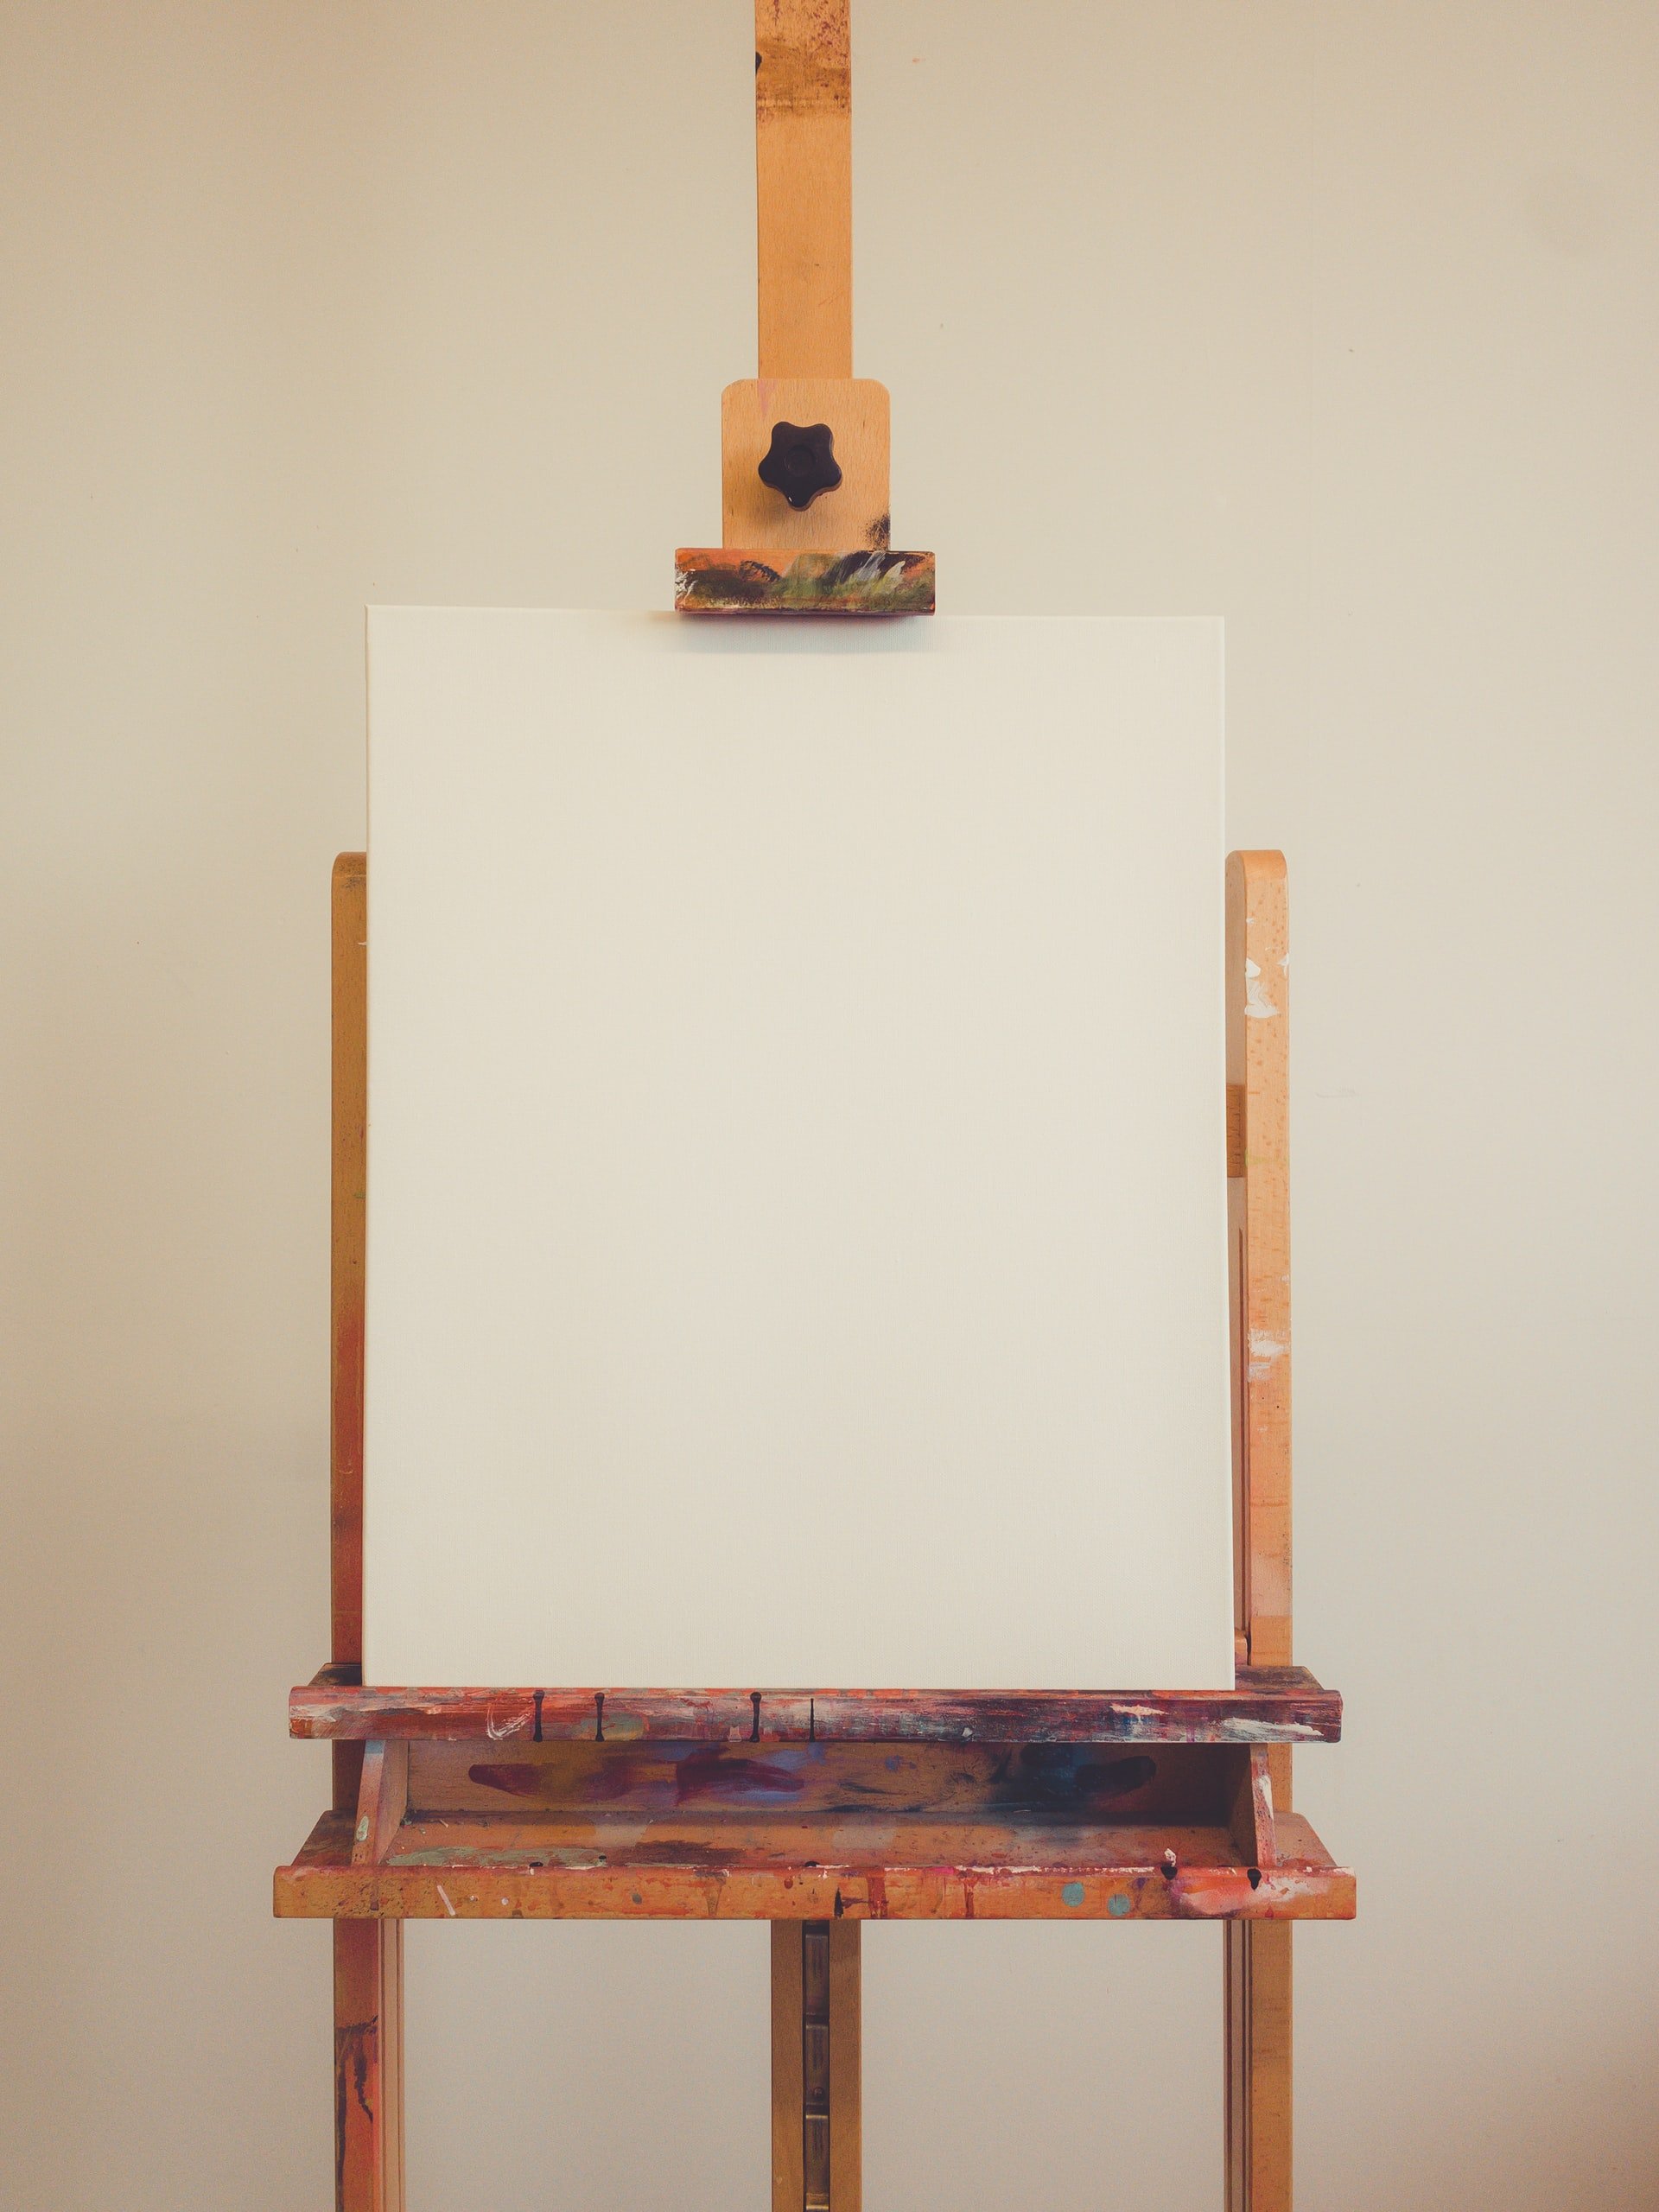 There was an easel with a canvas in the room. | Source: Unsplash